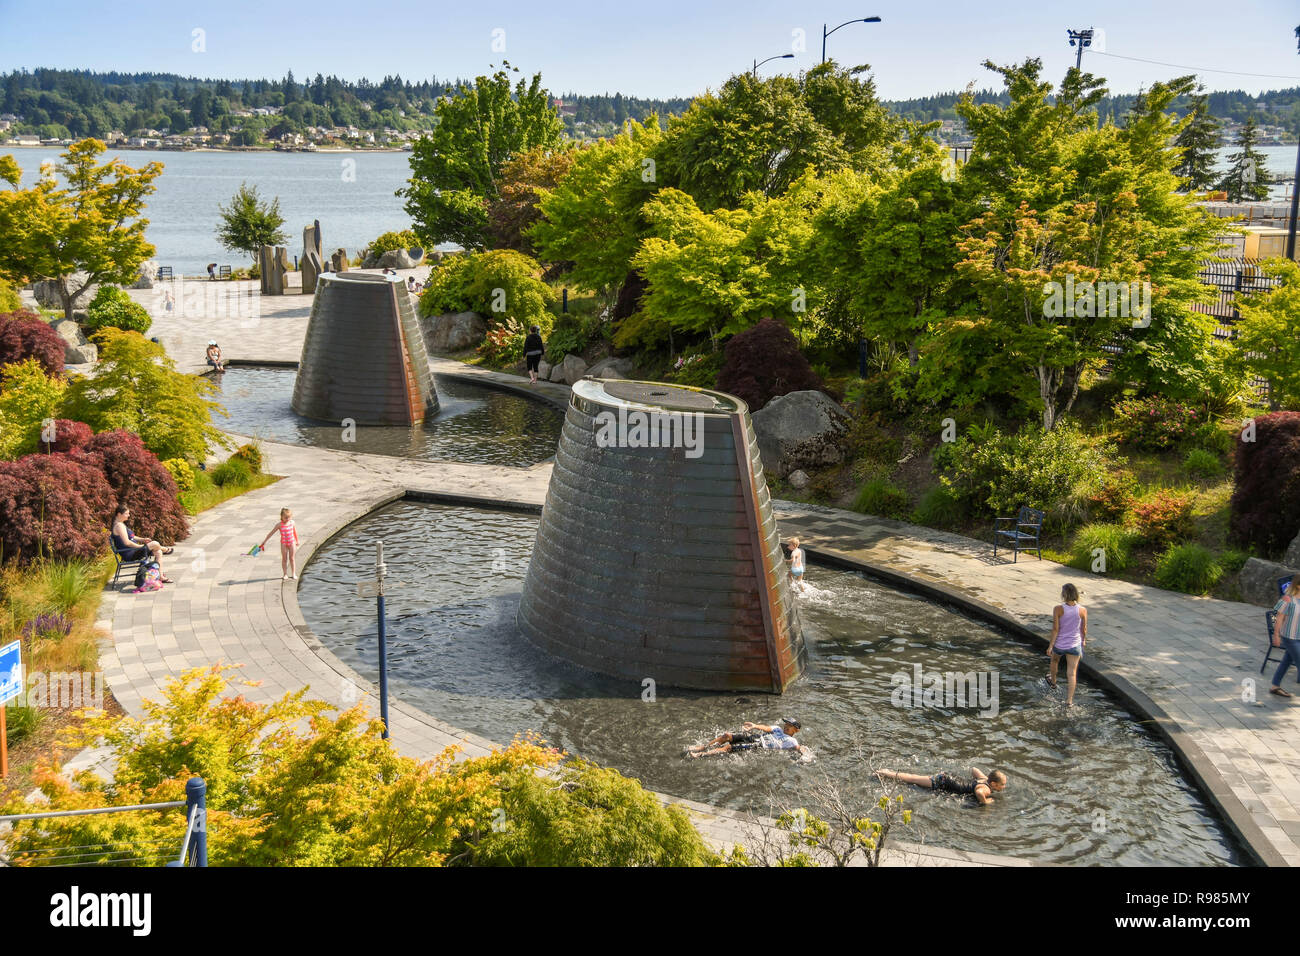 BREMERTON, WASHINGTON STATE, USA - JUNE 2018: Young people playing in the water features of the Harborside Fountain park in Bremerton, WA. Stock Photo